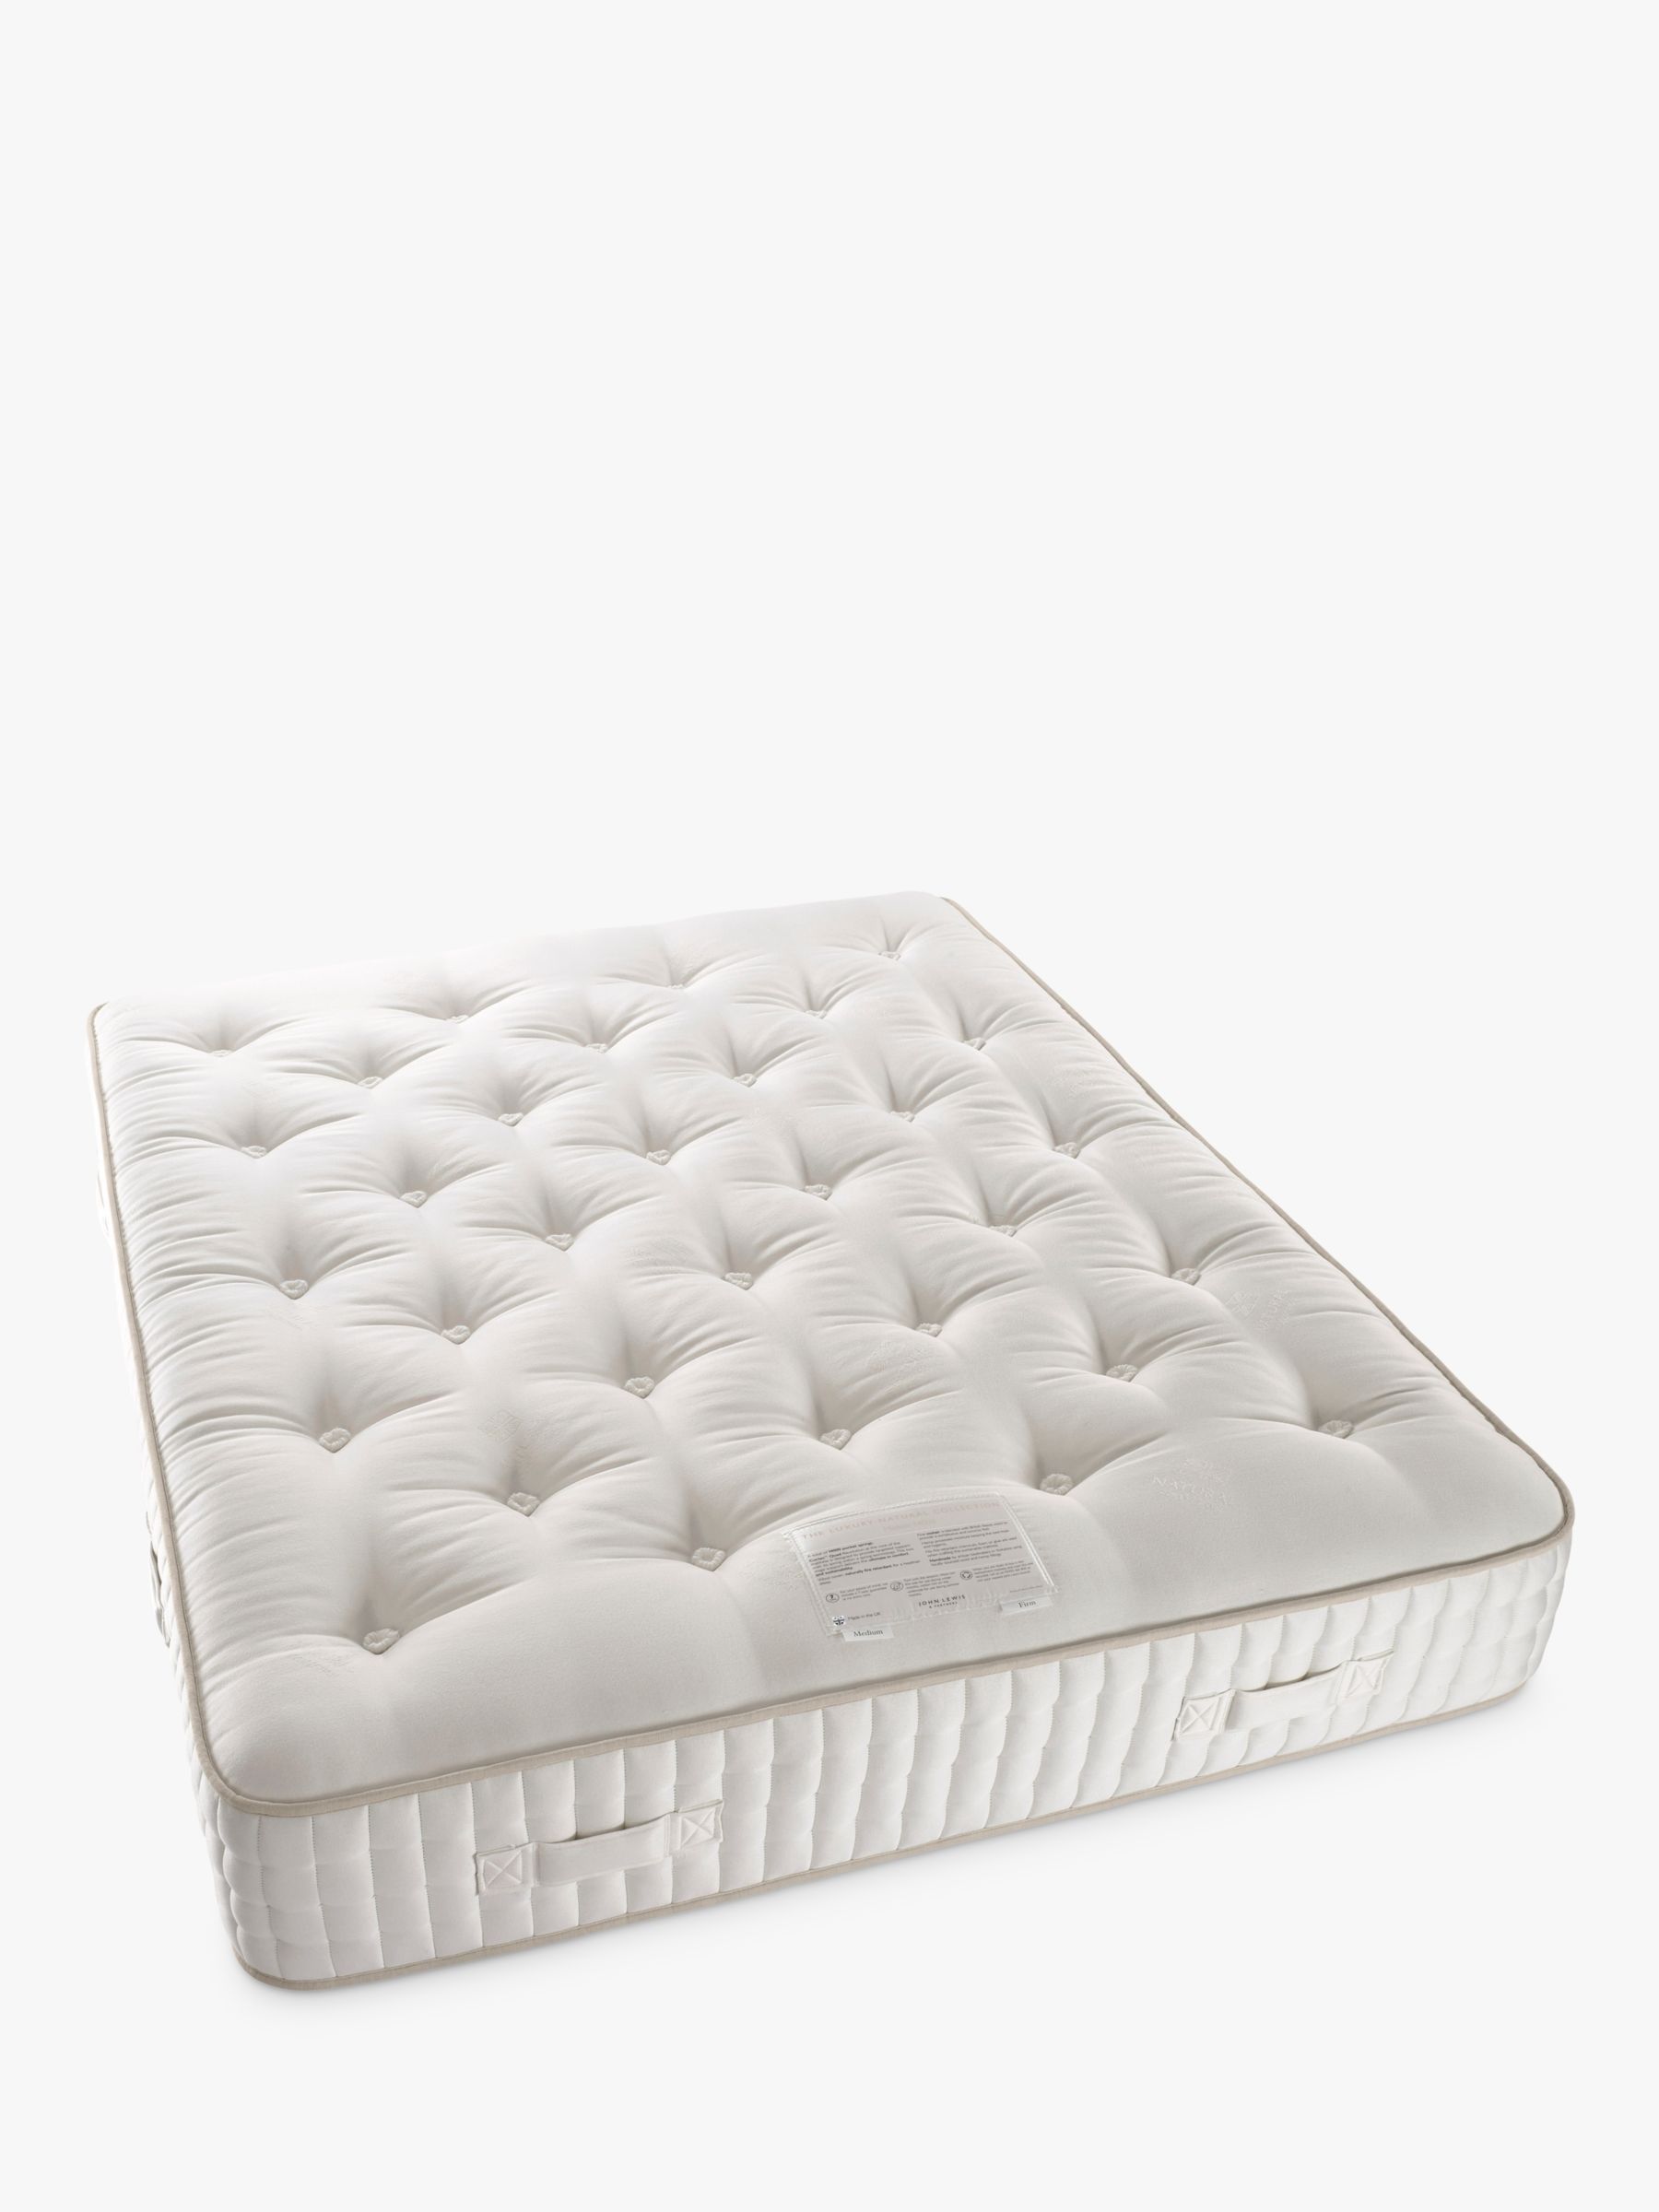 Photo of John lewis luxury natural collection mohair 14000 double firmer tension pocket spring mattress